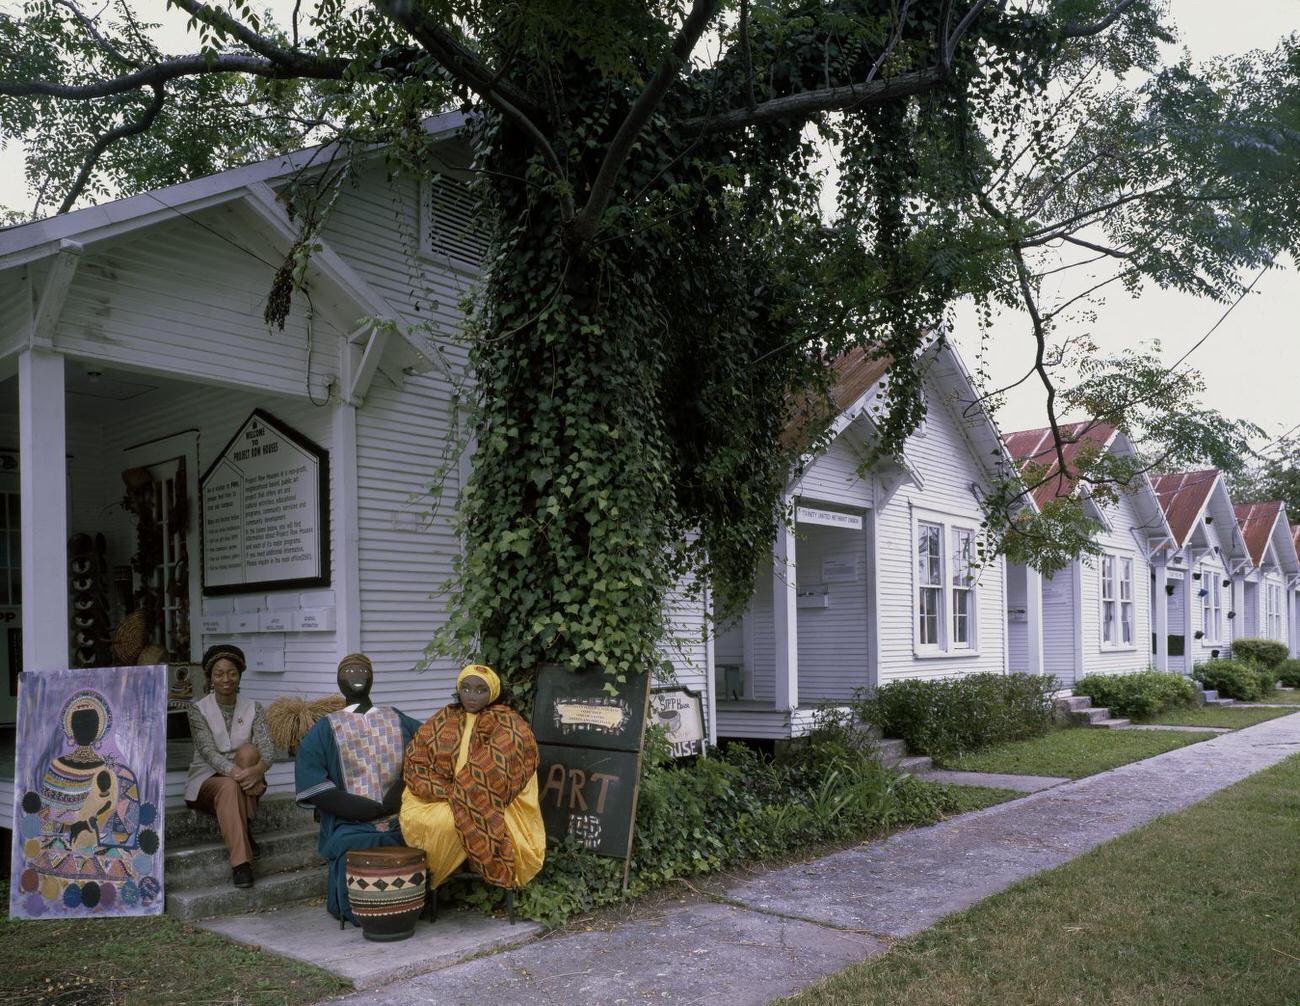 Houston artists in front of Project Row House in the Third Ward, Houston, Texas, 1990s